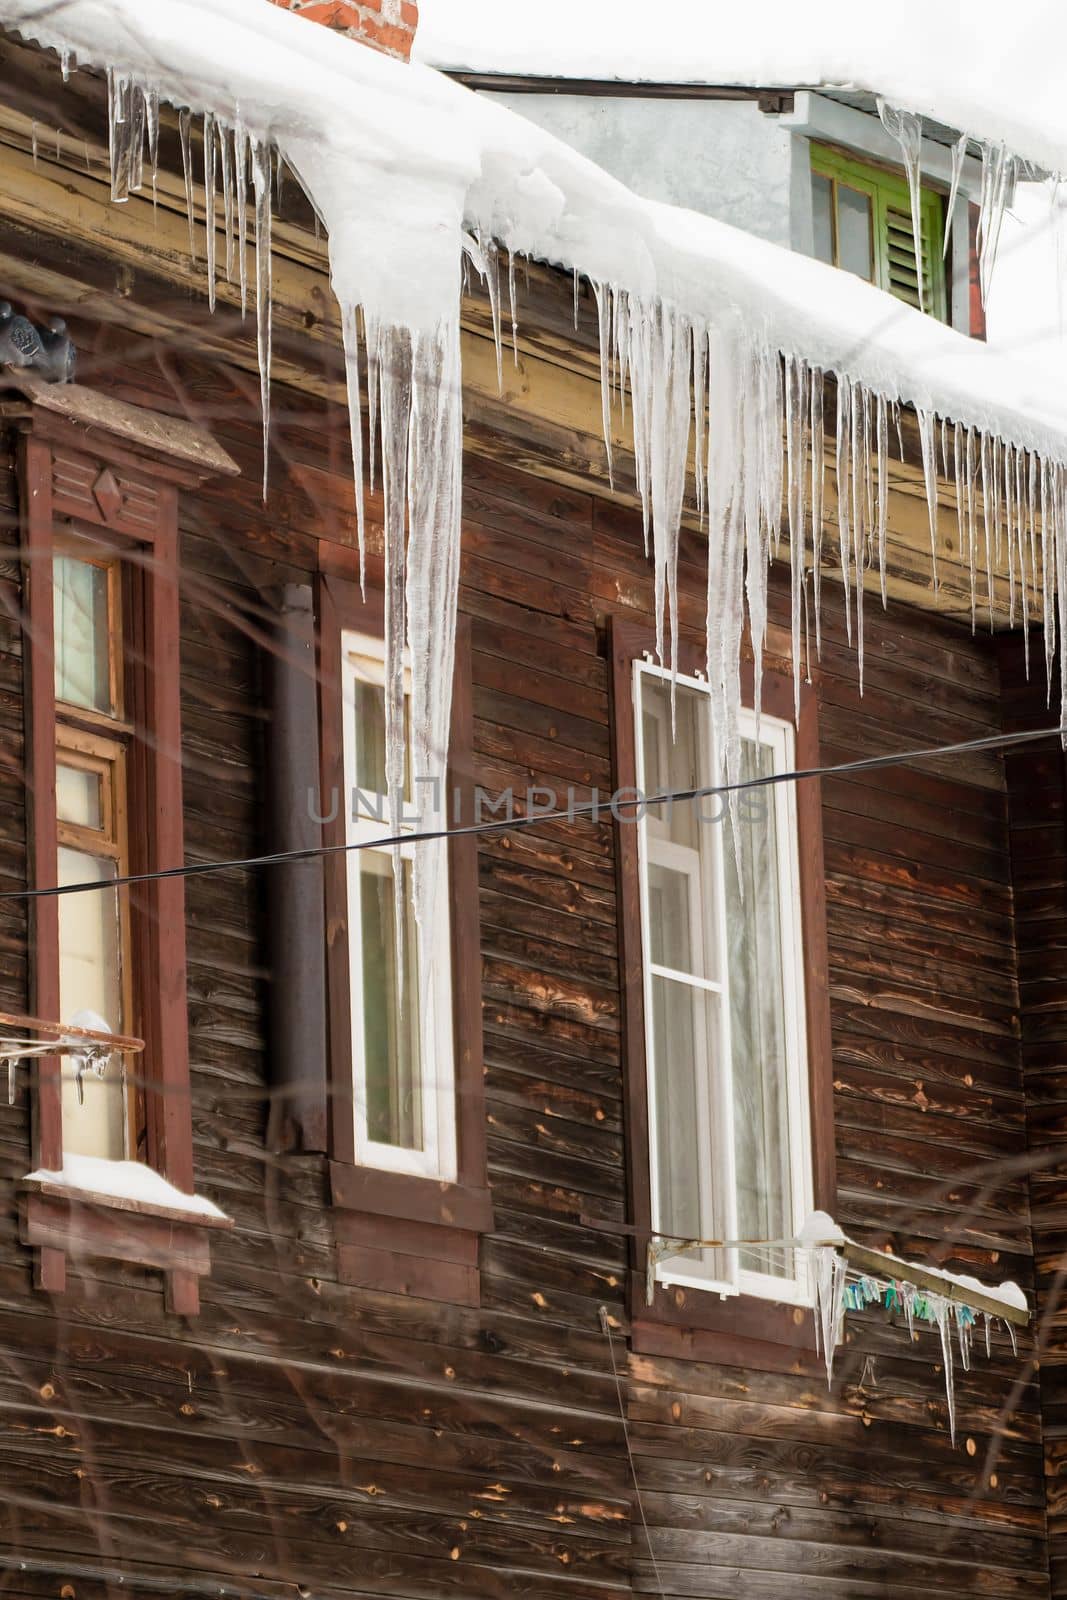 Multiple icicles hang on the edge of the roof, winter or spring. by anarni33